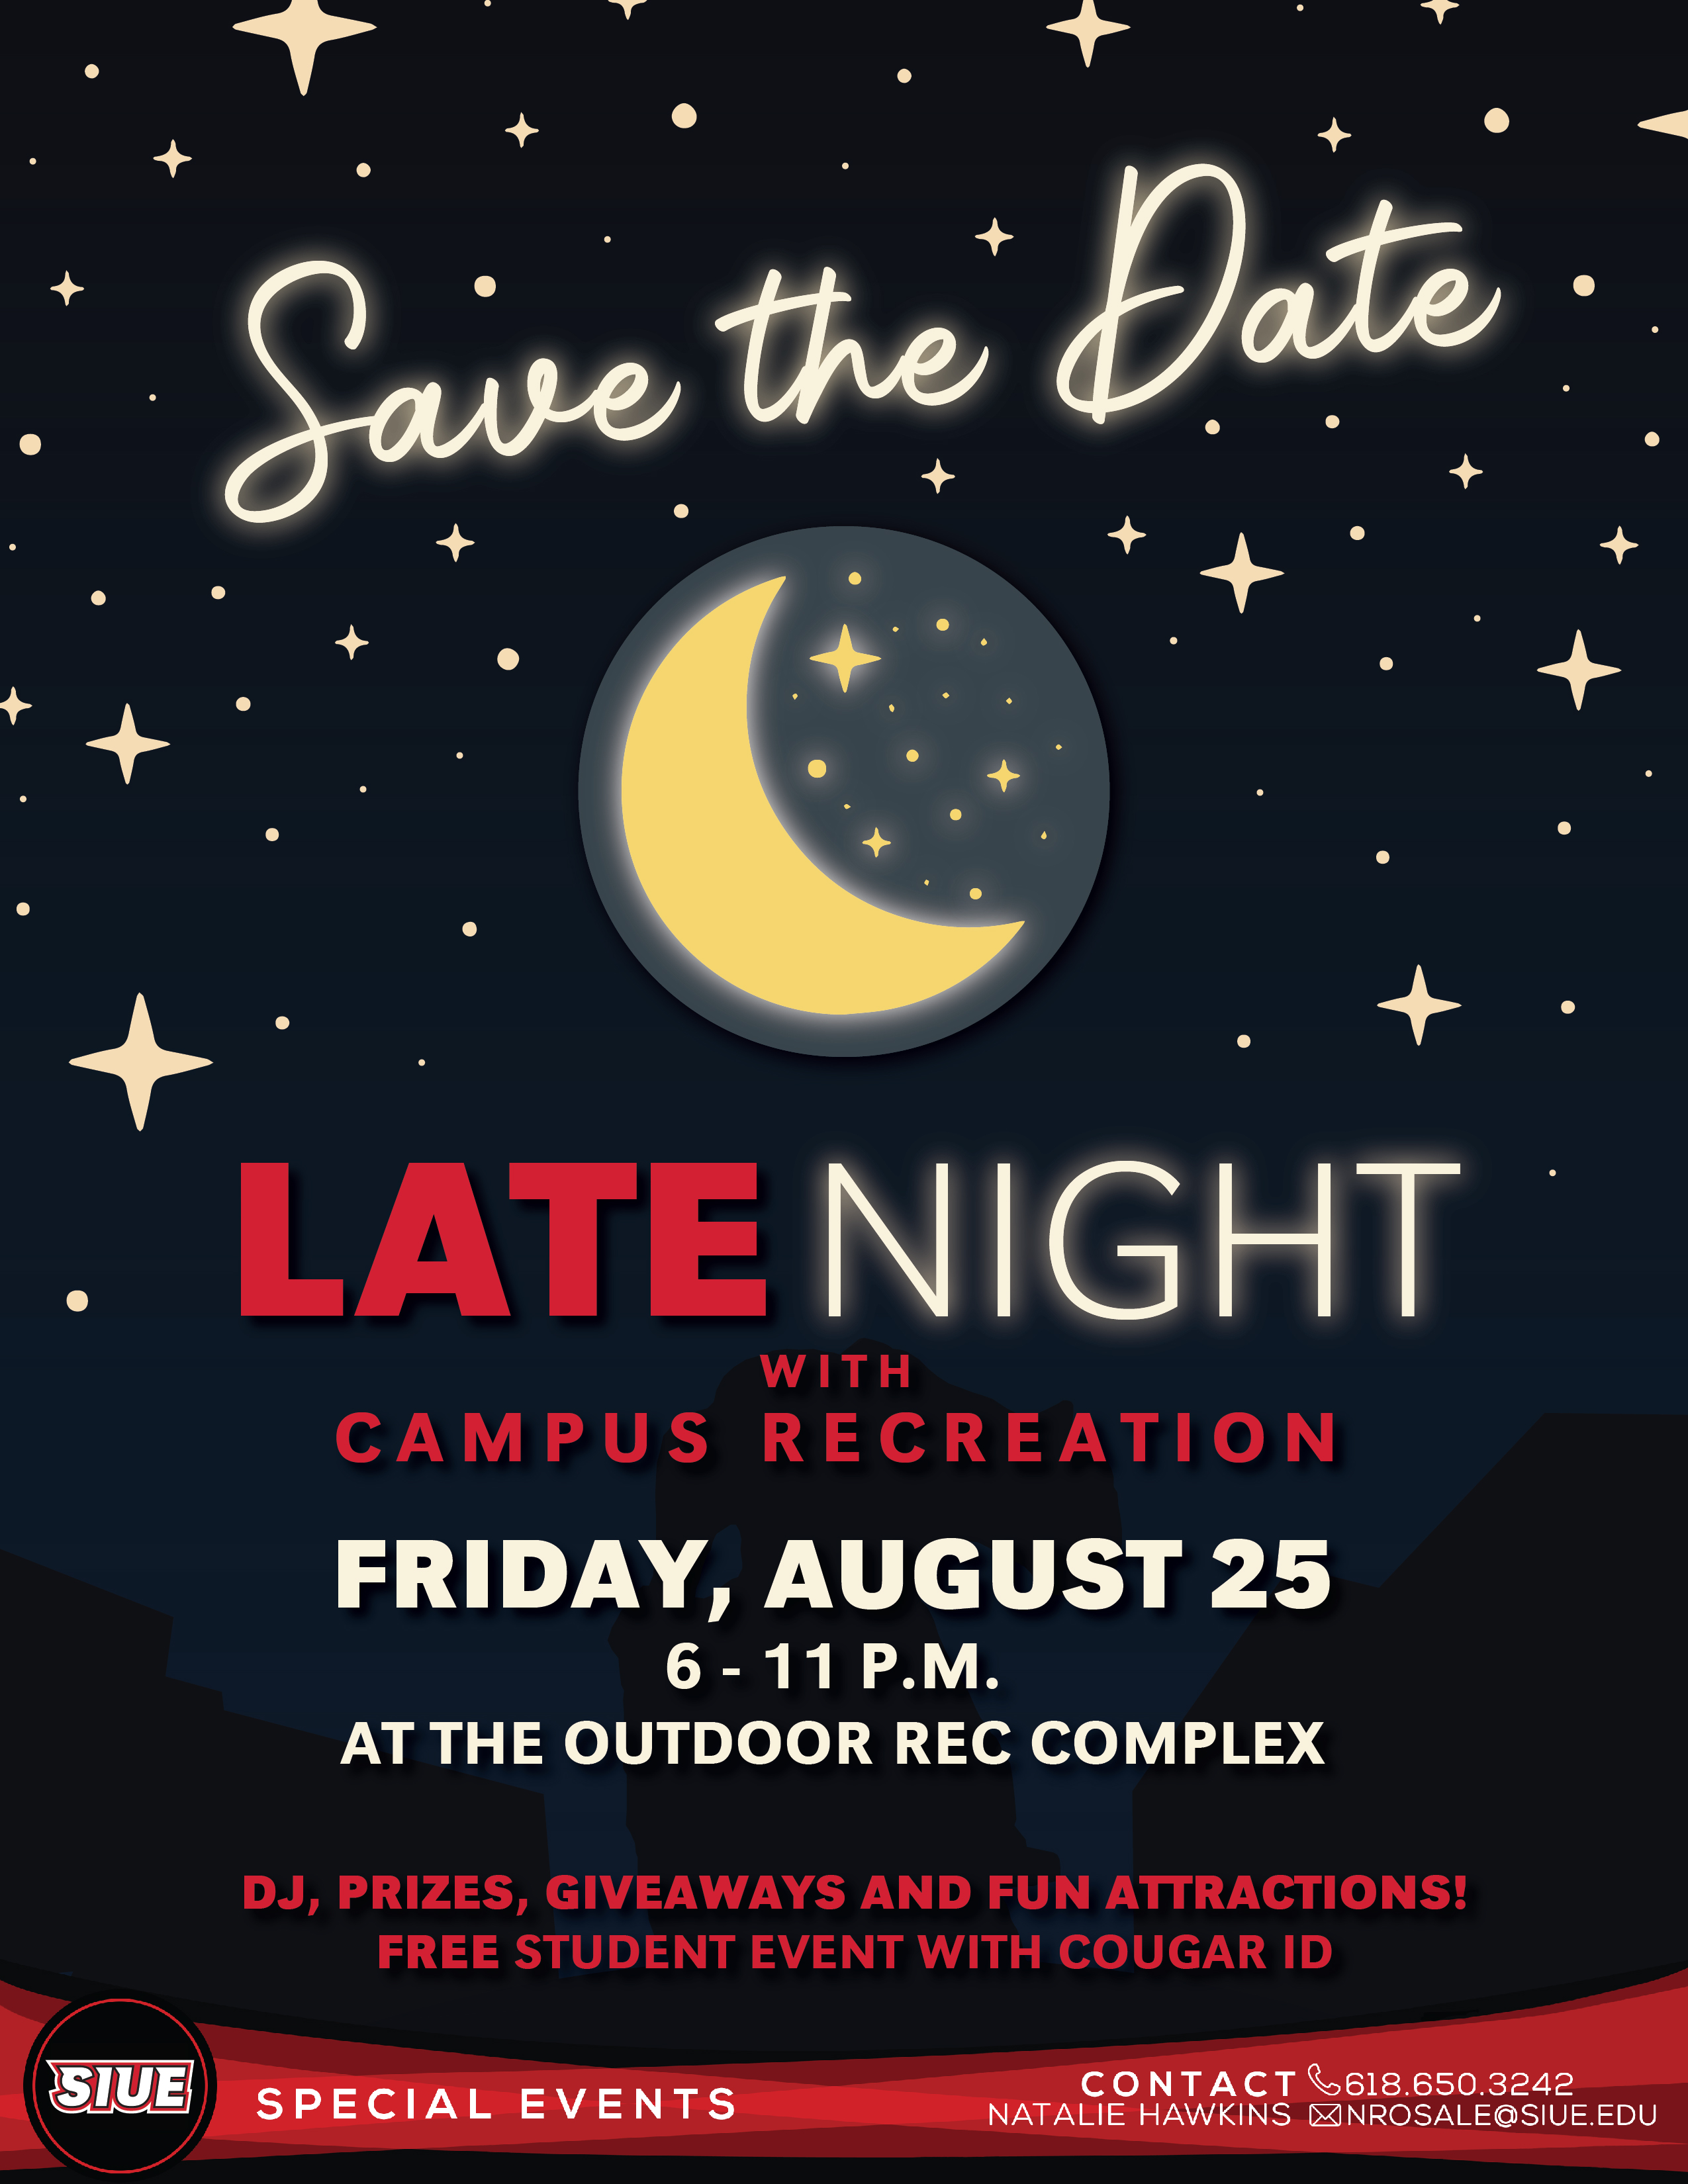 Save the Date: Late Night with Campus Recreation